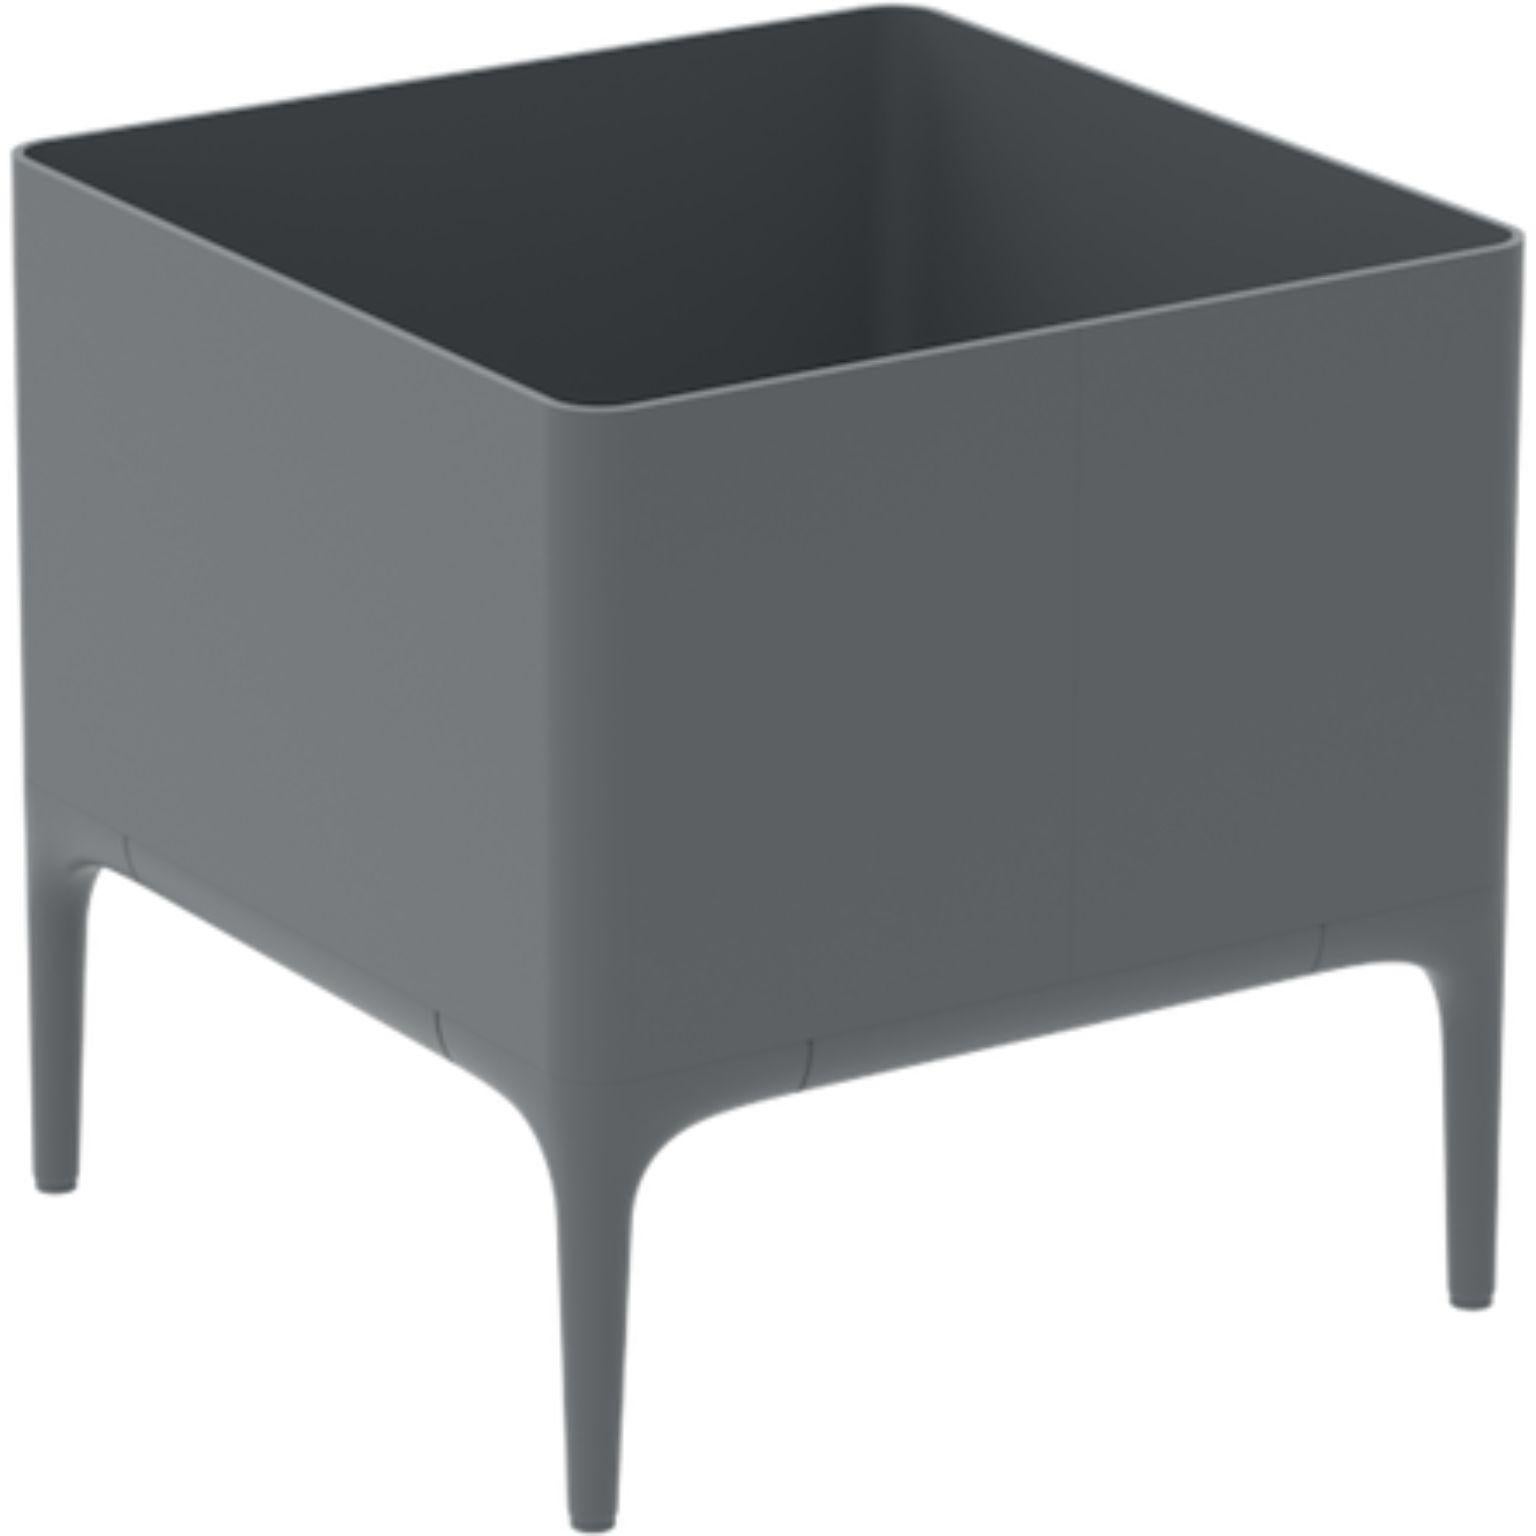 Xaloc grey 45 pot by Mowee
Dimensions: D45 x W45 x H45 cm
Material: Aluminium
Weight: 8 kg
Also Available in different colours and finishes.

 Xaloc synthesizes the lines of interior furniture to extrapolate to the exterior, creating an